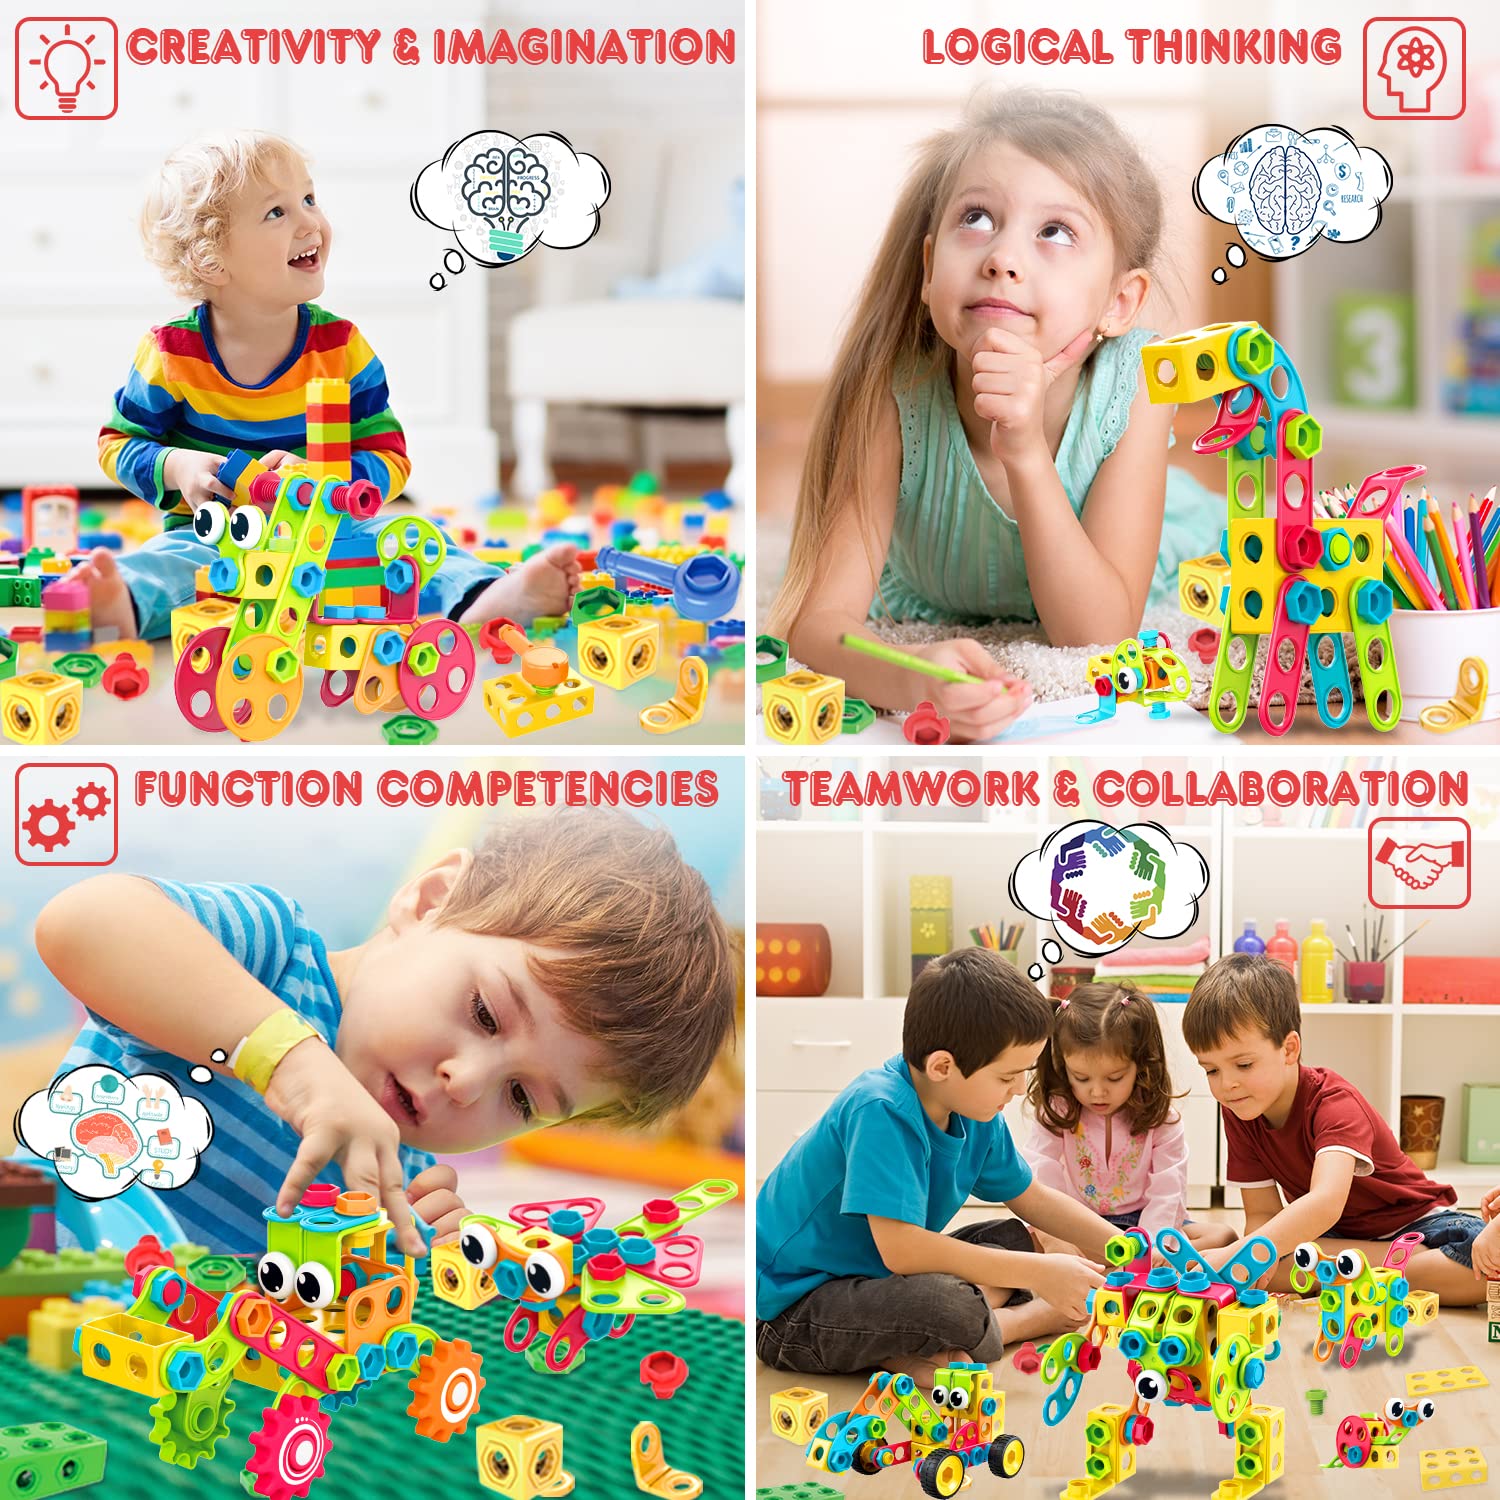 Nxone STEM Toys 195 PCS Building Toys Educational Toys for Boys and Girls Ages 3 4 5 6 7 8 9 10 Construction Building Blocks Toy Building Sets Kids Toys Creative Activities Games with Storage Box